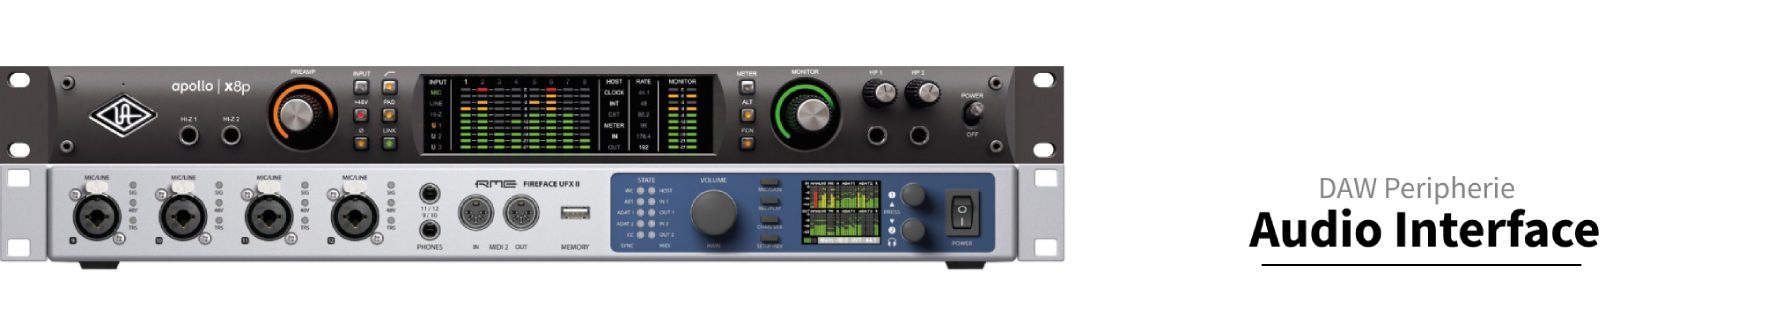 Audio Interface-8 Inputs-8 Preamps